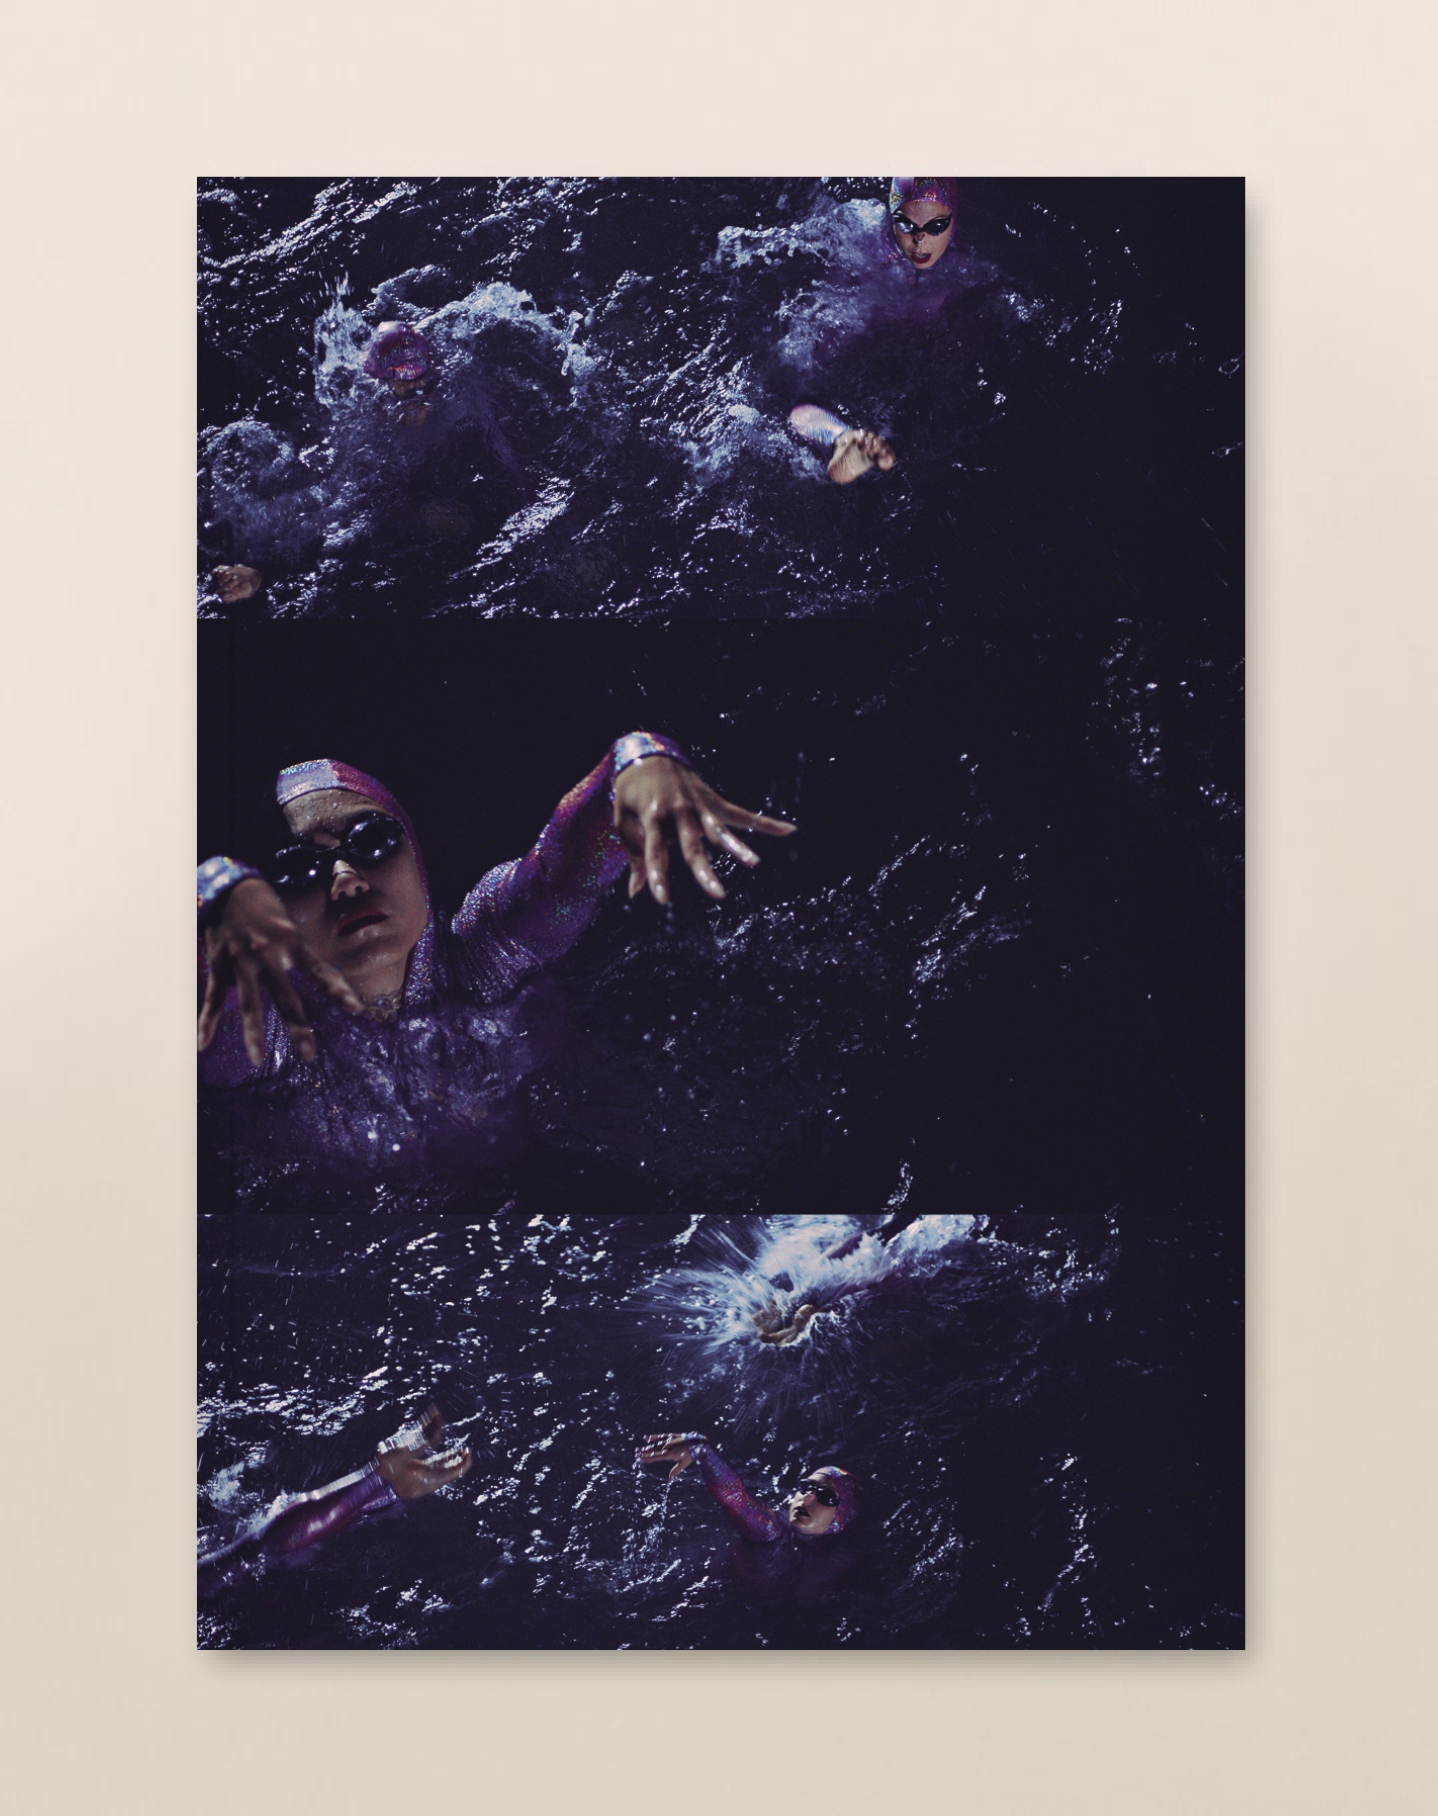 an image of Issue 33 of The White Review, featuring three film stills of swimmers in goggles and caps in dark water